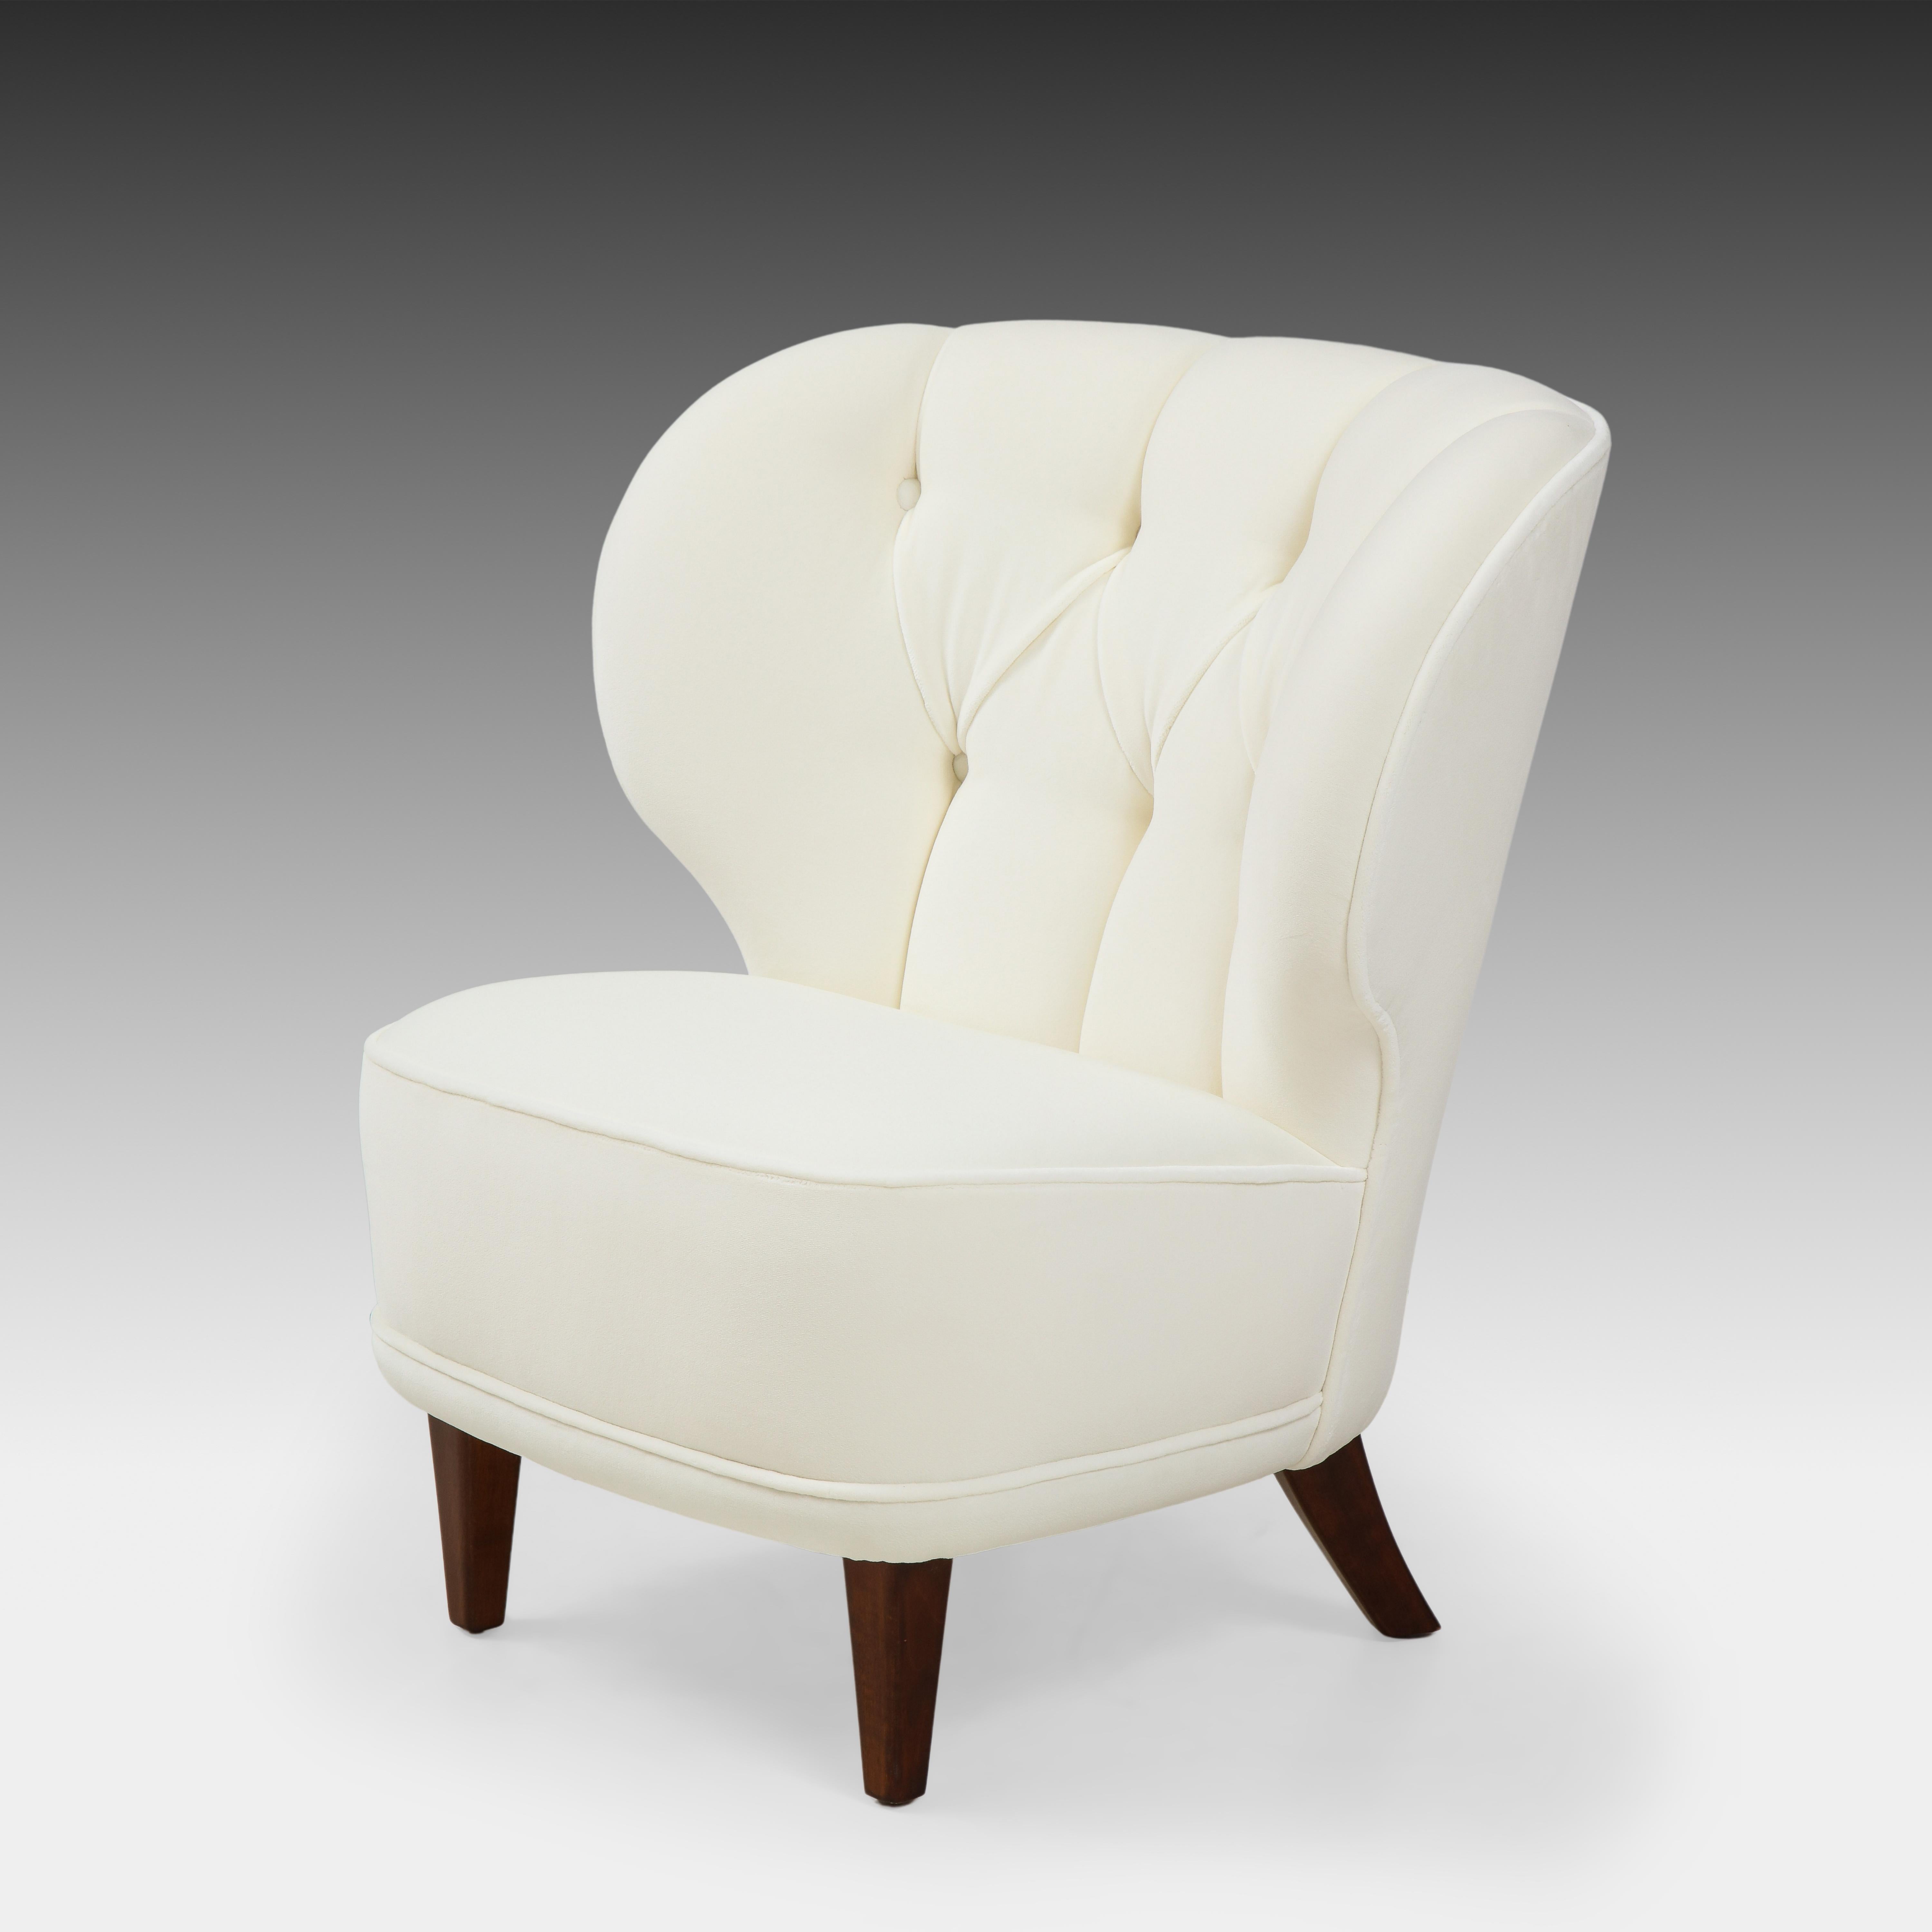 Carl-Johan Boman Rare Pair of Ivory Velvet Tufted Easy Chairs, Finland, 1940s For Sale 1